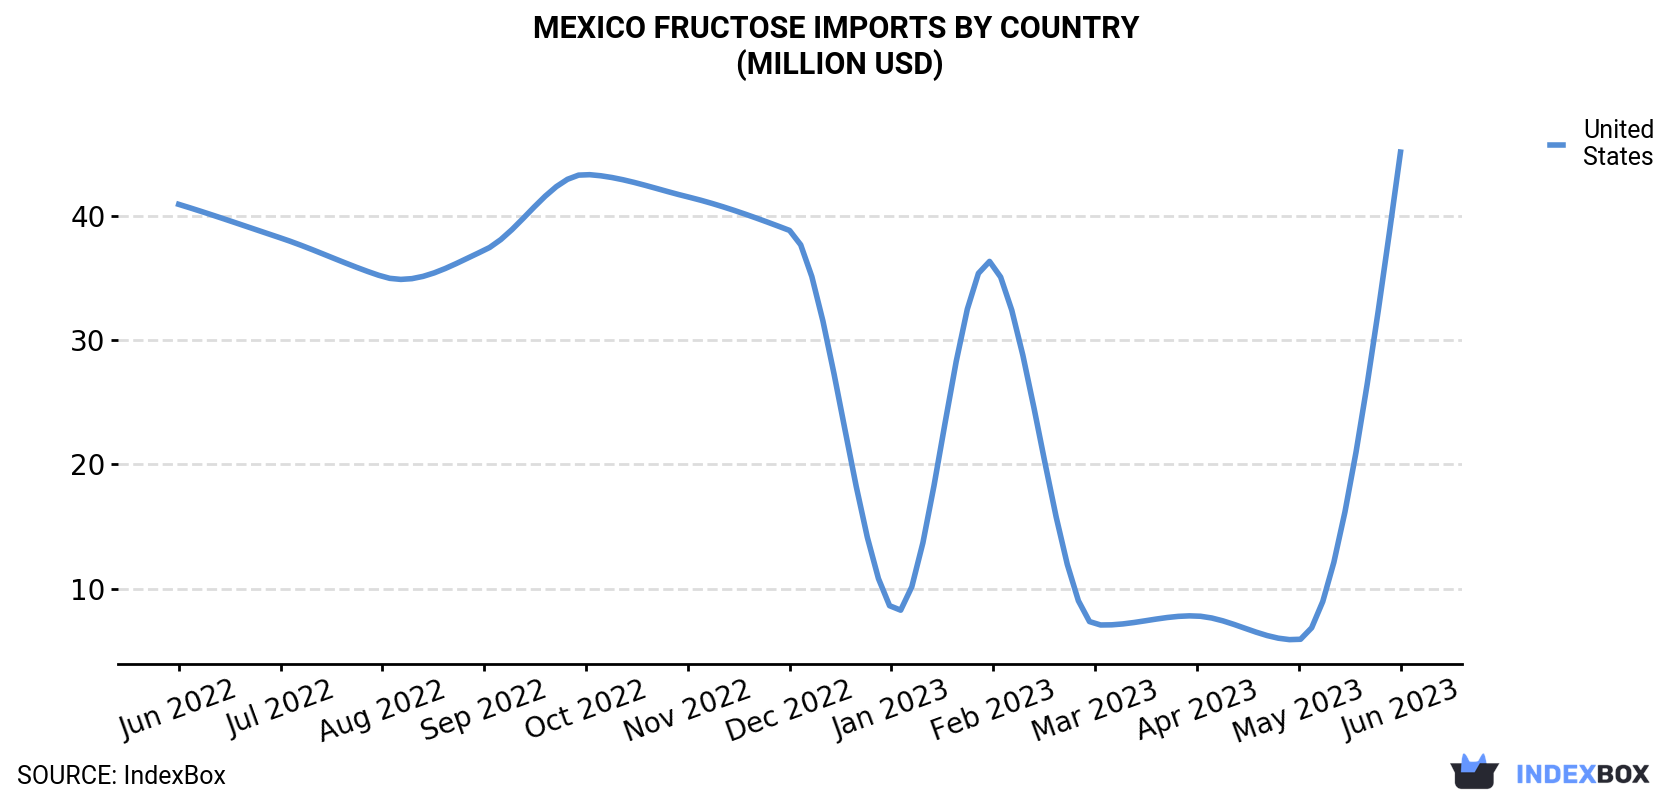 Mexico Fructose Imports By Country (Million USD)